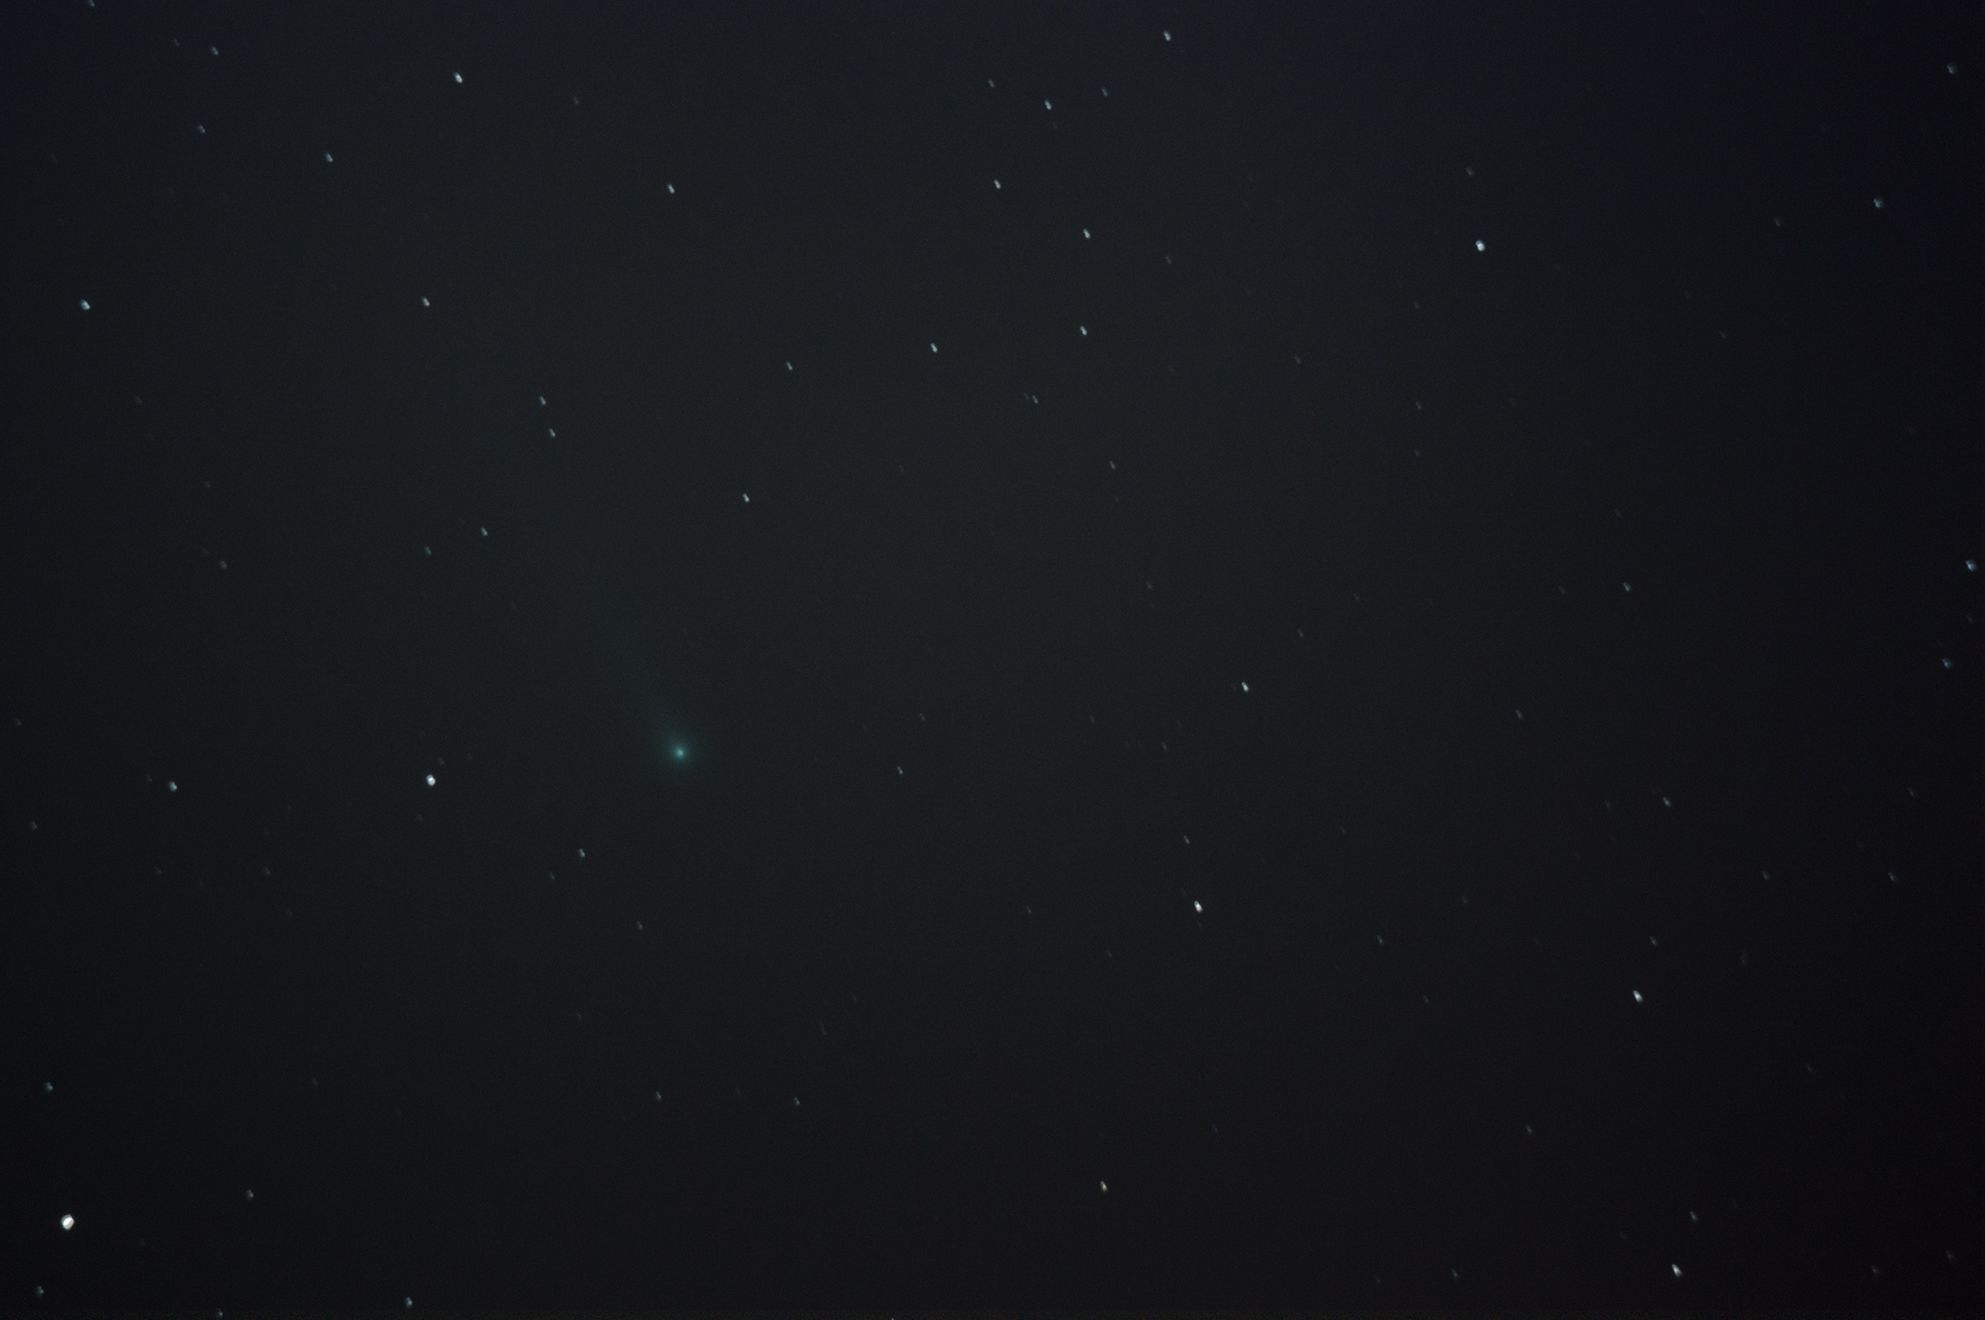 Comet ISON 11-7-13 at US Store